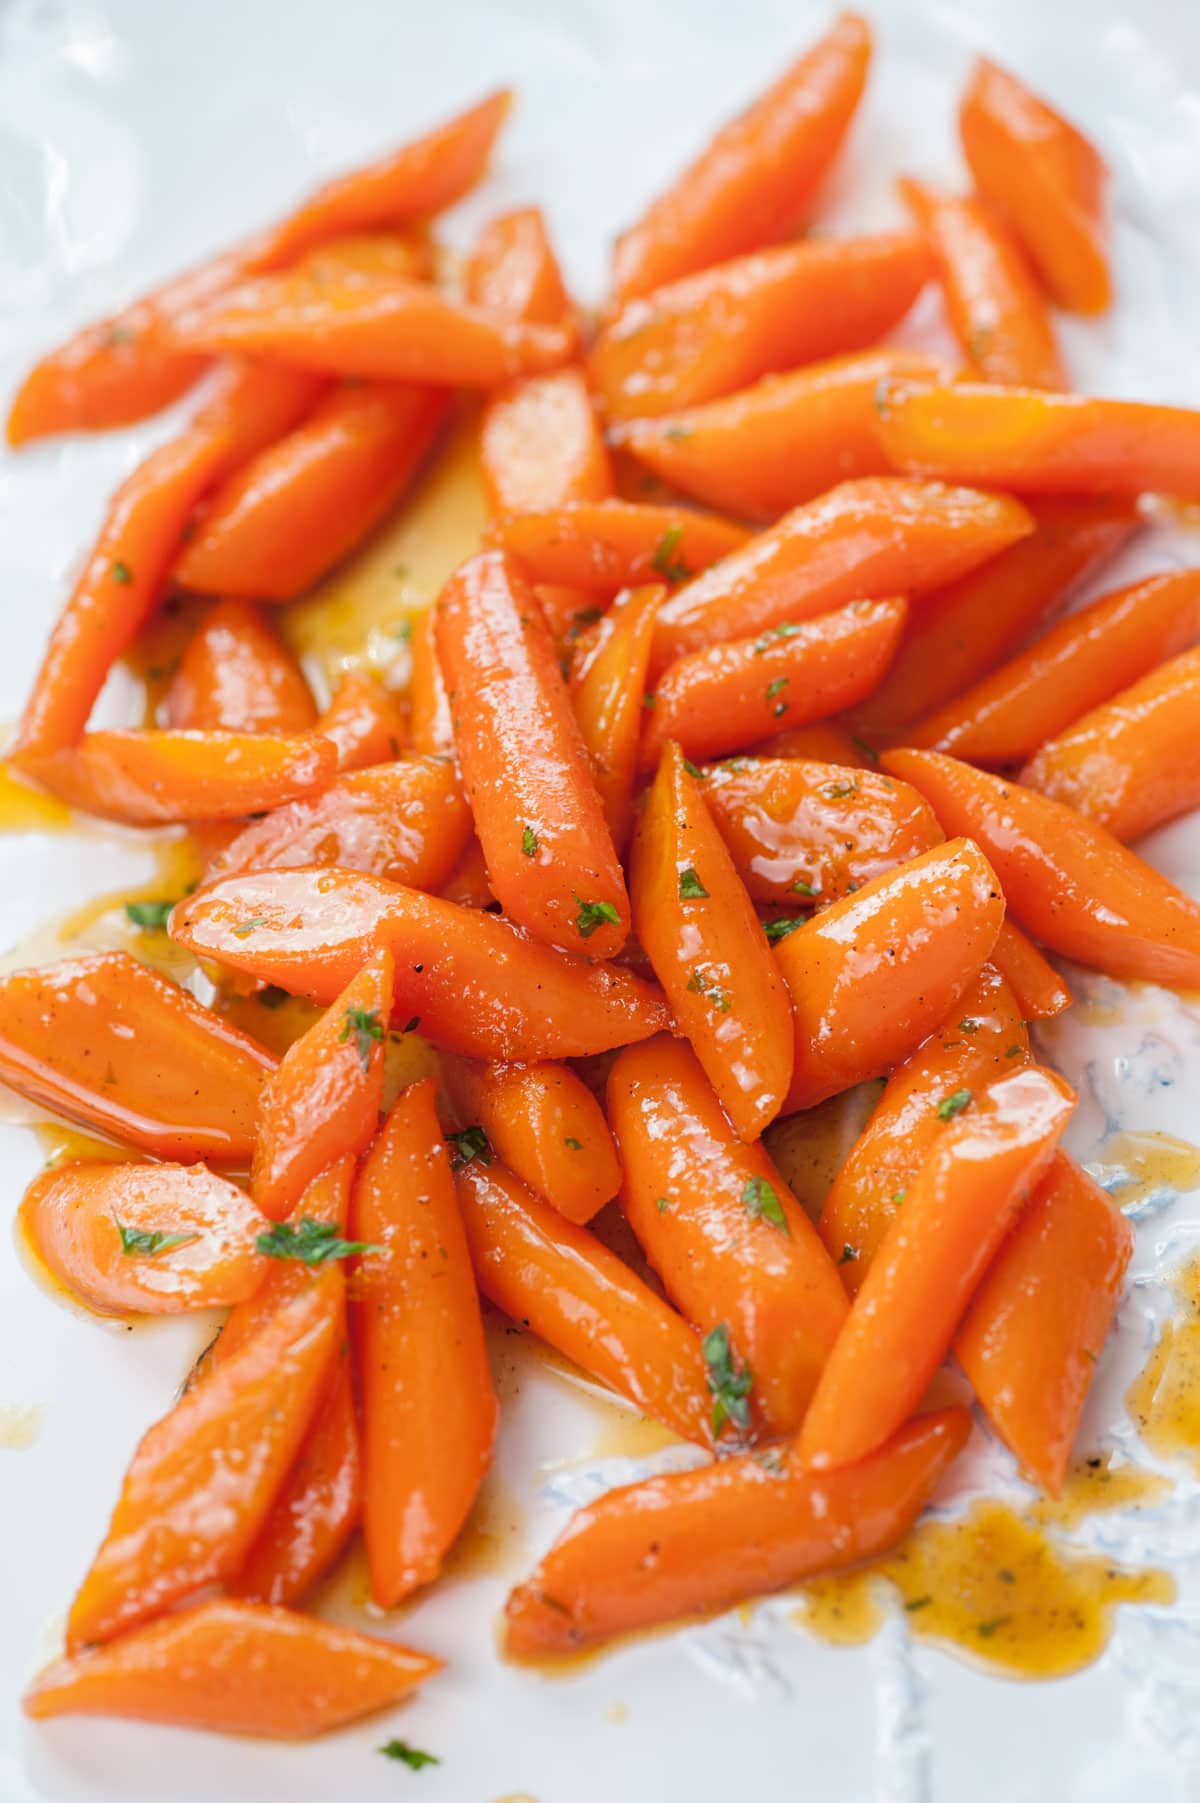 https://www.everyday-delicious.com/wp-content/uploads/2021/09/honey-glazed-carrots-everyday-delicious-3.jpg